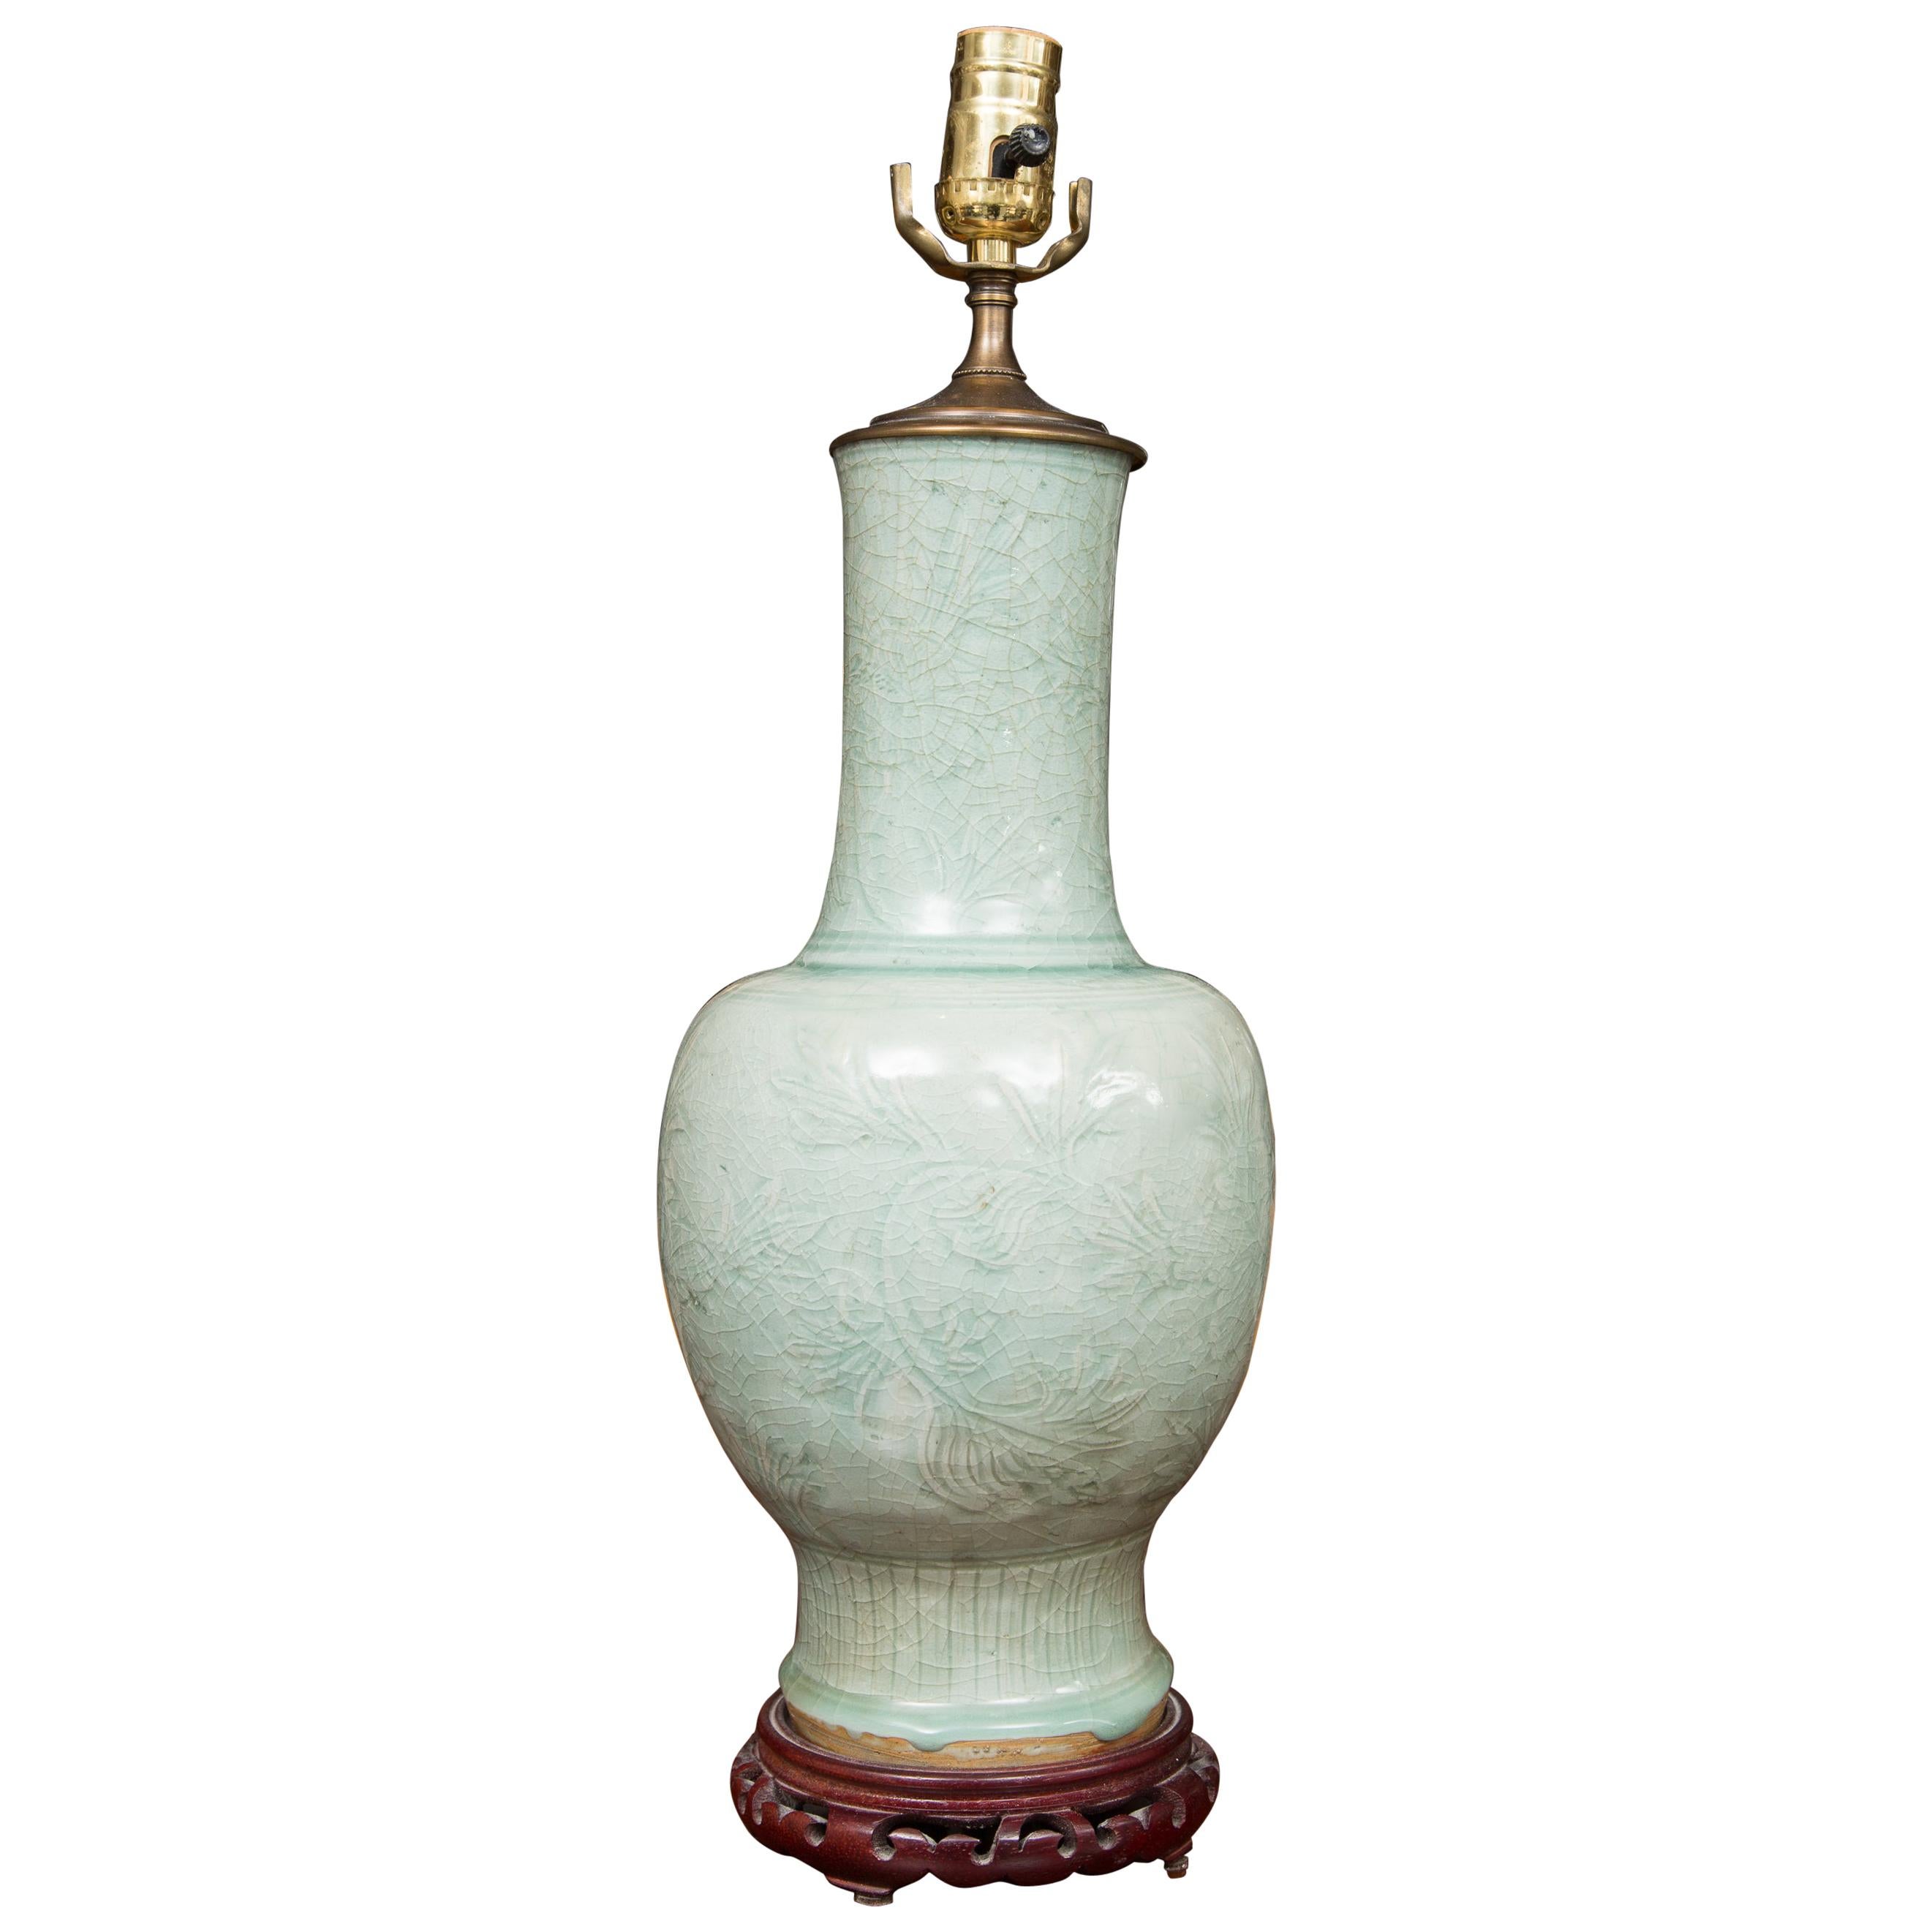 Early Celadon Vase as a Table Lamp